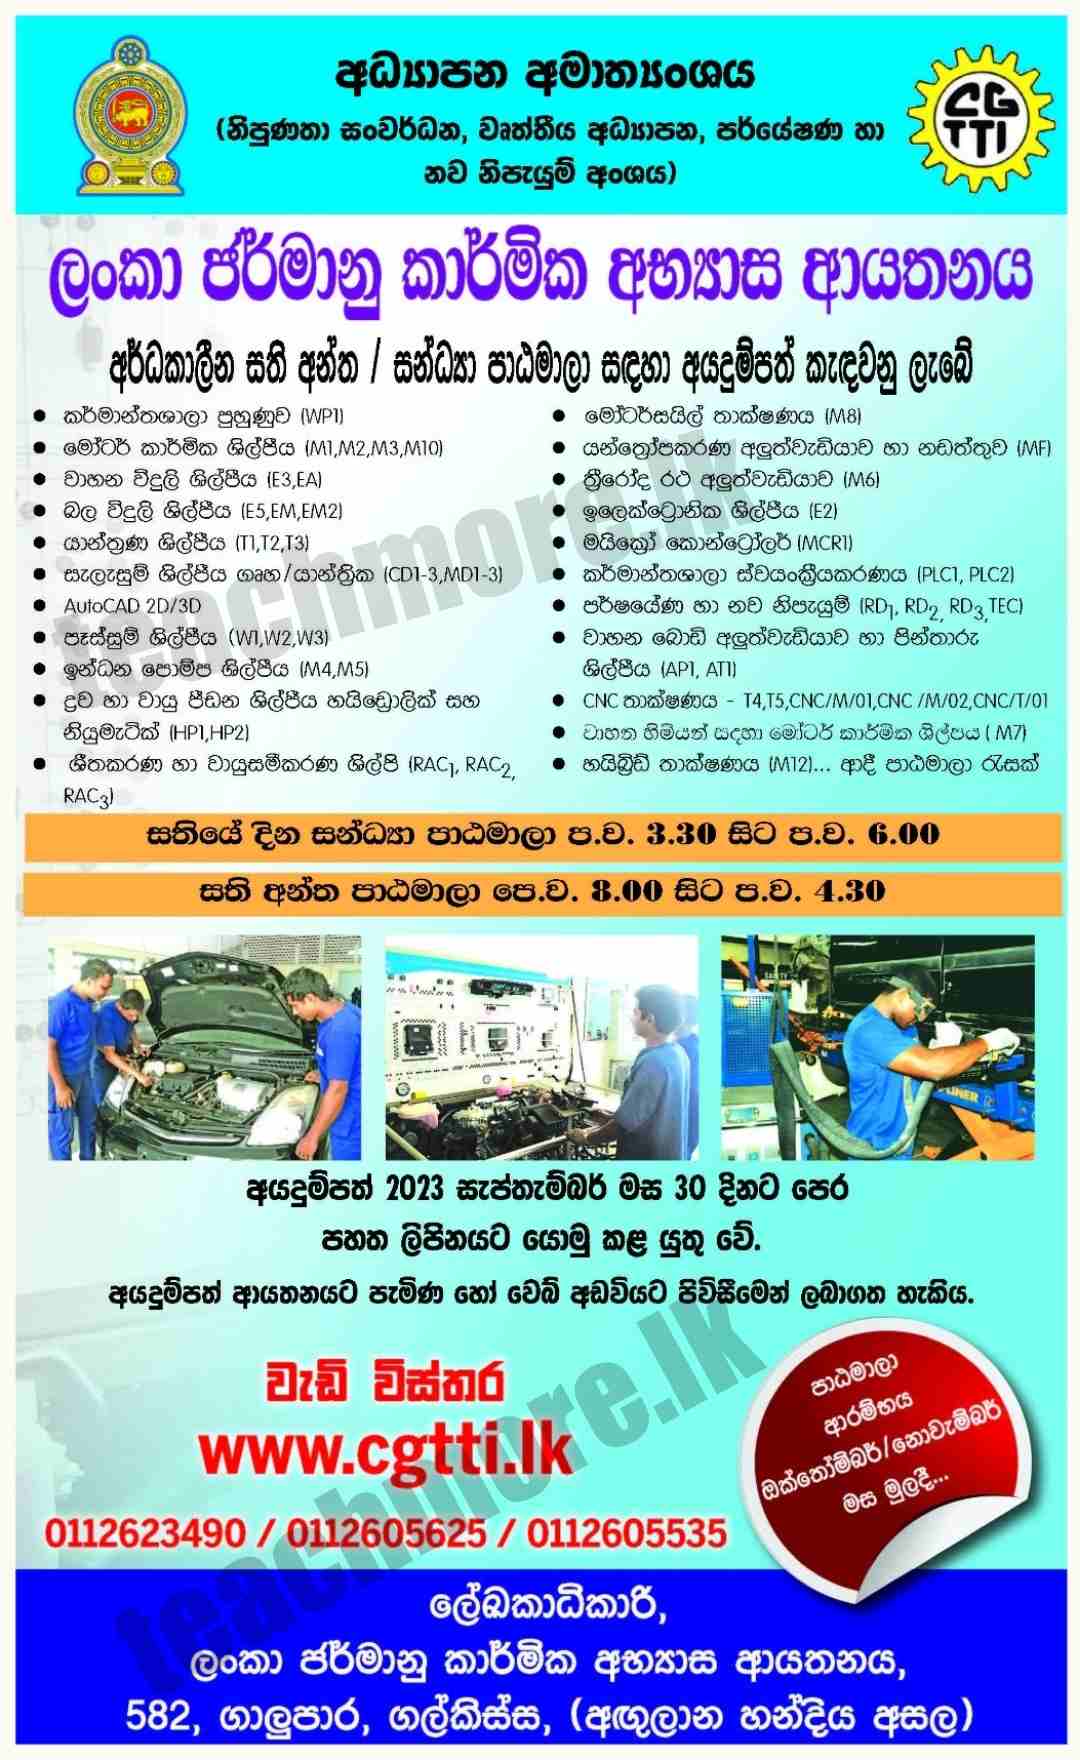 Application to Part-time Training Courses 2023 : Ceylon - German Technical Training Institute 